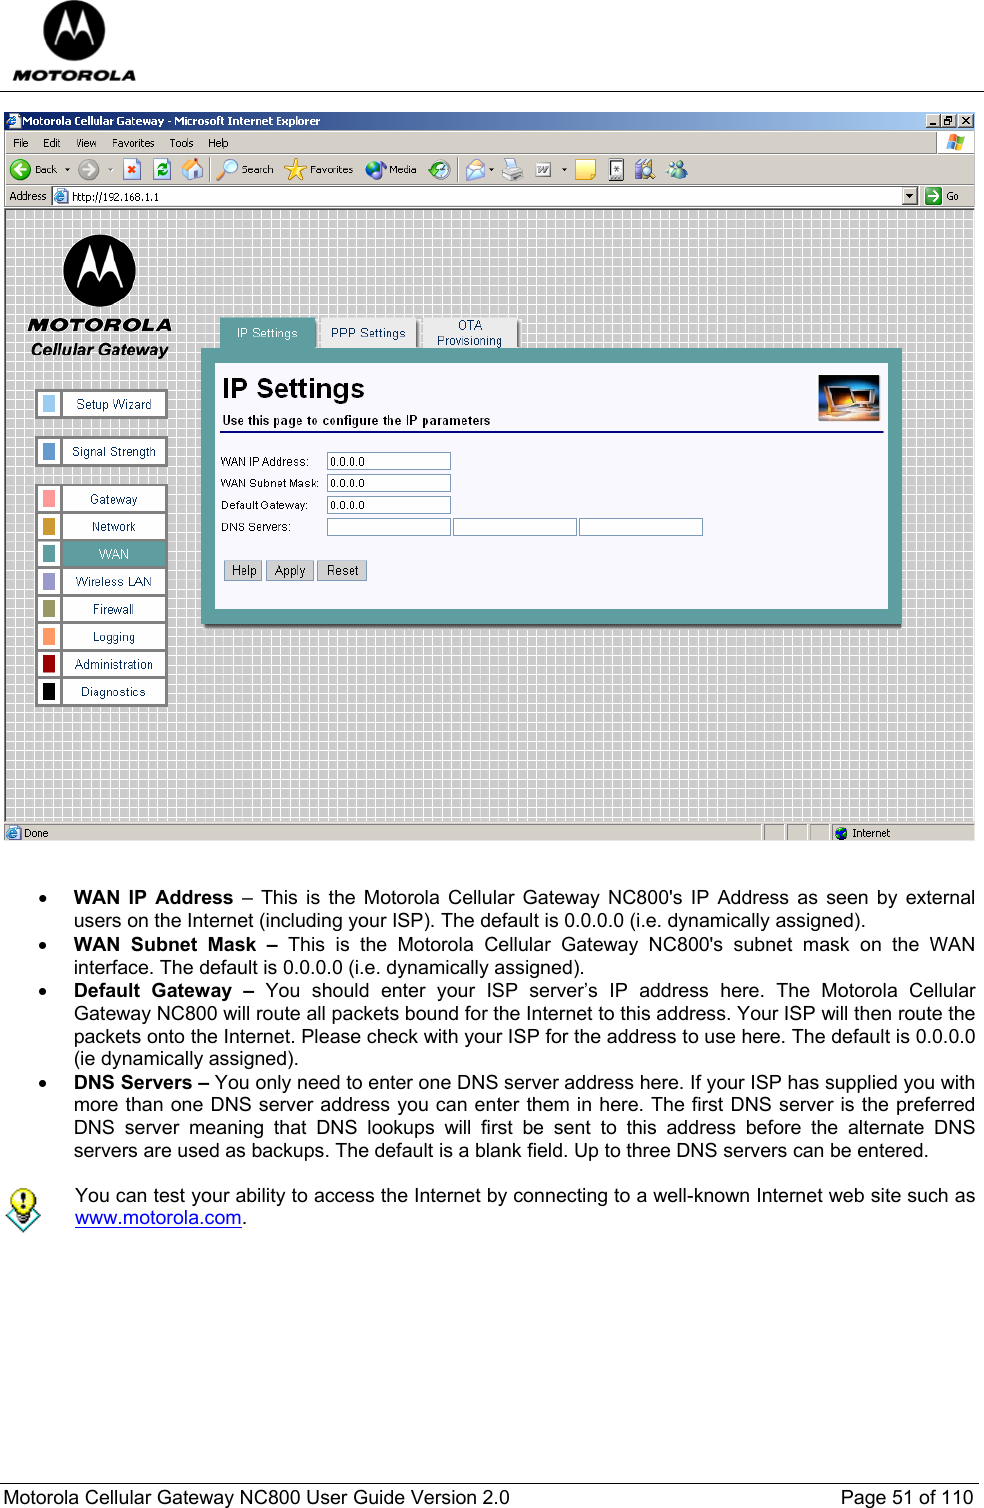  Motorola Cellular Gateway NC800 User Guide Version 2.0     Page 51 of 110     • WAN IP Address – This is the Motorola Cellular Gateway NC800&apos;s IP Address as seen by external users on the Internet (including your ISP). The default is 0.0.0.0 (i.e. dynamically assigned). • WAN Subnet Mask – This is the Motorola Cellular Gateway NC800&apos;s subnet mask on the WAN interface. The default is 0.0.0.0 (i.e. dynamically assigned). • Default Gateway – You should enter your ISP server’s IP address here. The Motorola Cellular Gateway NC800 will route all packets bound for the Internet to this address. Your ISP will then route the packets onto the Internet. Please check with your ISP for the address to use here. The default is 0.0.0.0 (ie dynamically assigned). • DNS Servers – You only need to enter one DNS server address here. If your ISP has supplied you with more than one DNS server address you can enter them in here. The first DNS server is the preferred DNS server meaning that DNS lookups will first be sent to this address before the alternate DNS servers are used as backups. The default is a blank field. Up to three DNS servers can be entered.   You can test your ability to access the Internet by connecting to a well-known Internet web site such as www.motorola.com.        